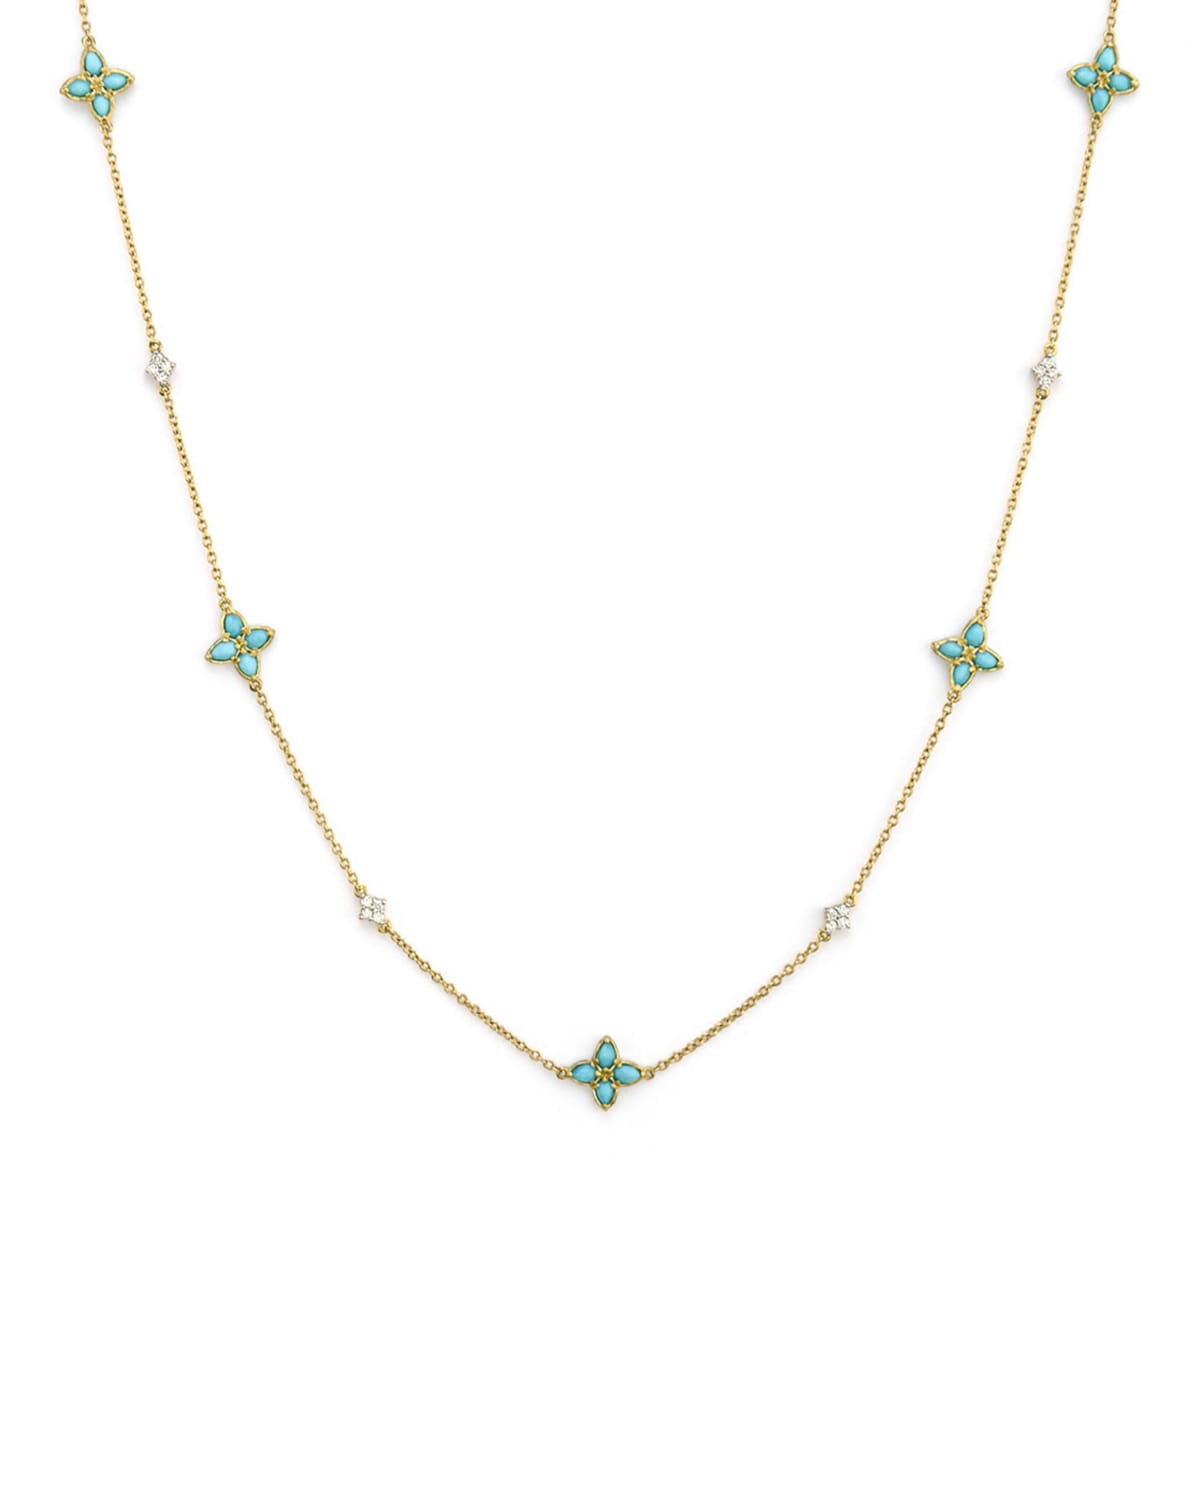 Jude Frances Moroccan Pear Flower Station Necklace W/ Turquoise & Diamonds